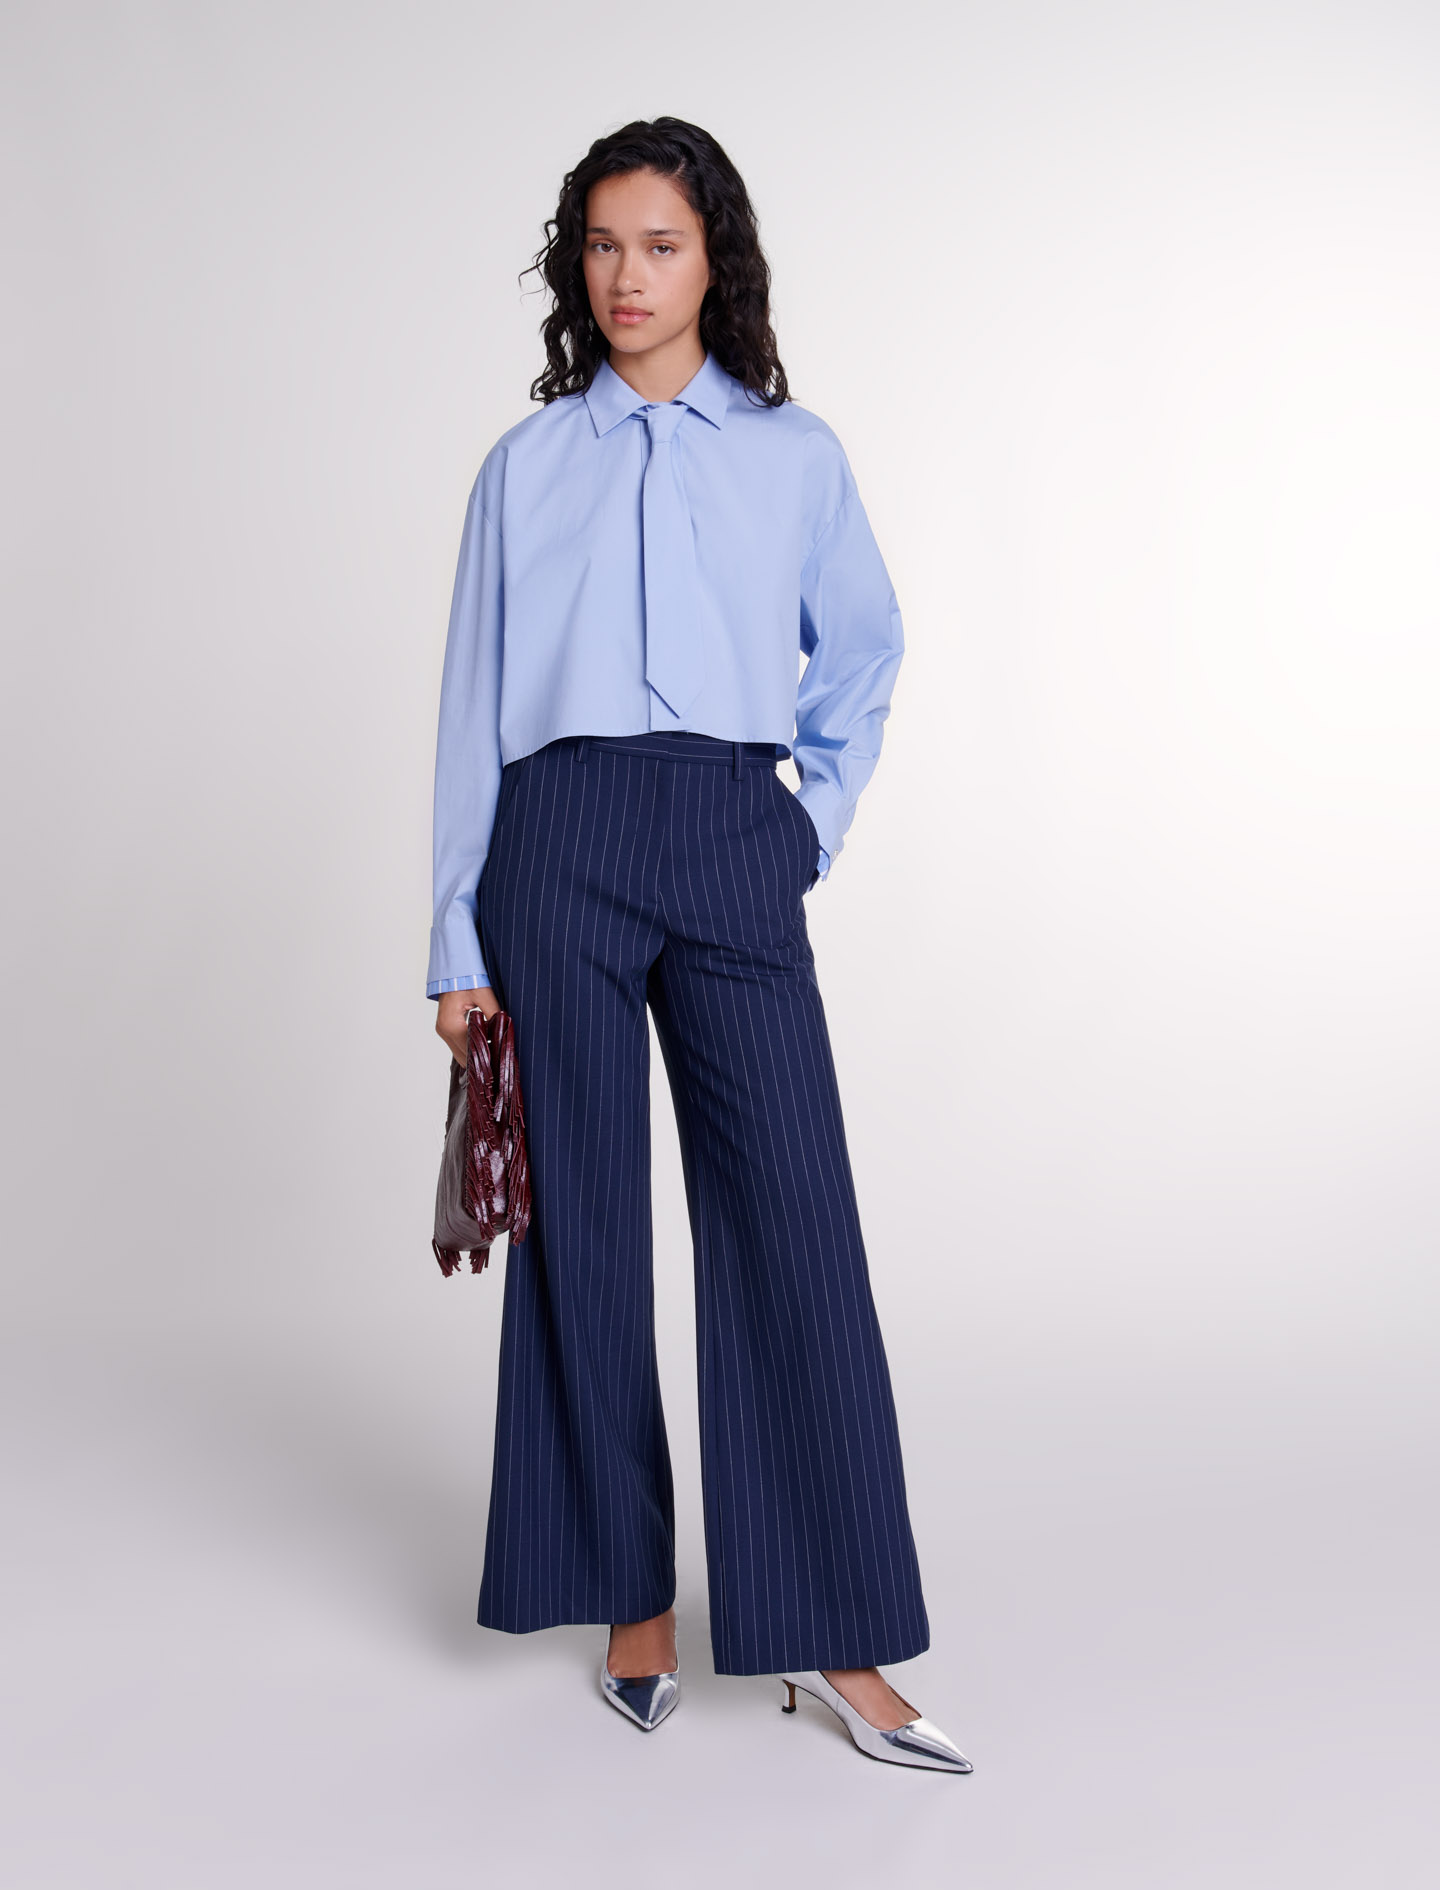 Maje Shirt With Removable Tie For Fall/winter In Blue